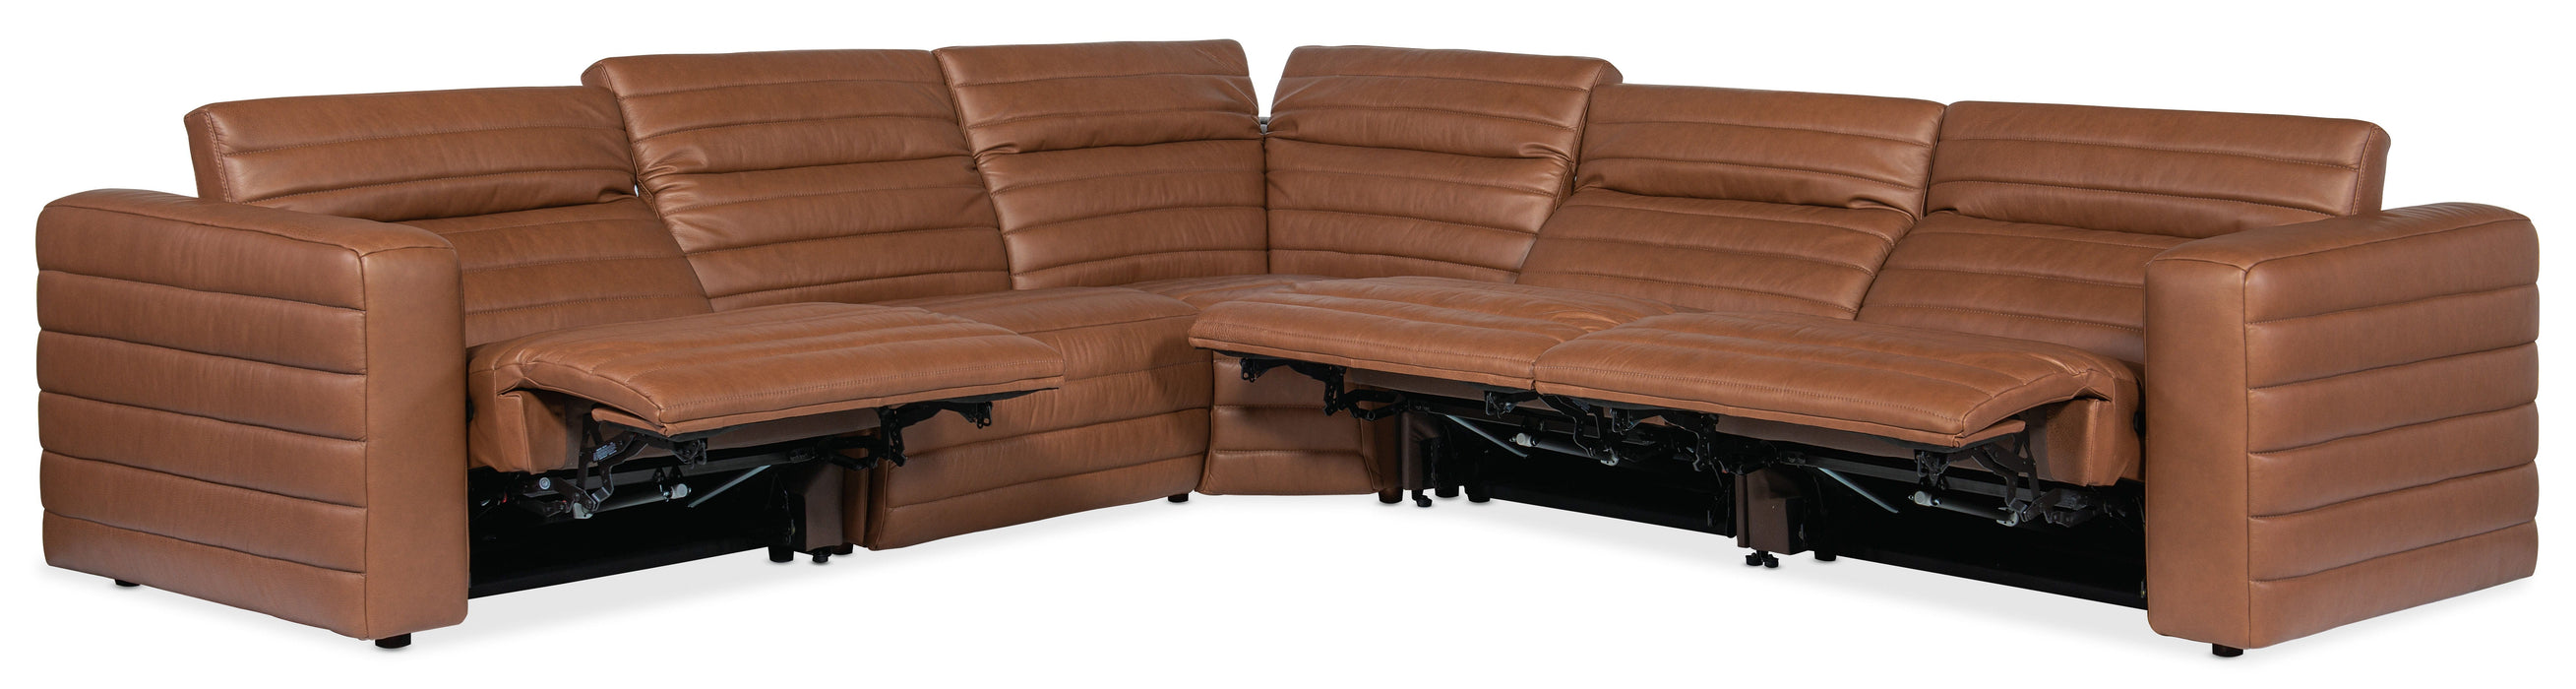 Chatelain 5-Piece Power Headrest Sectional With 2 Power Recliners